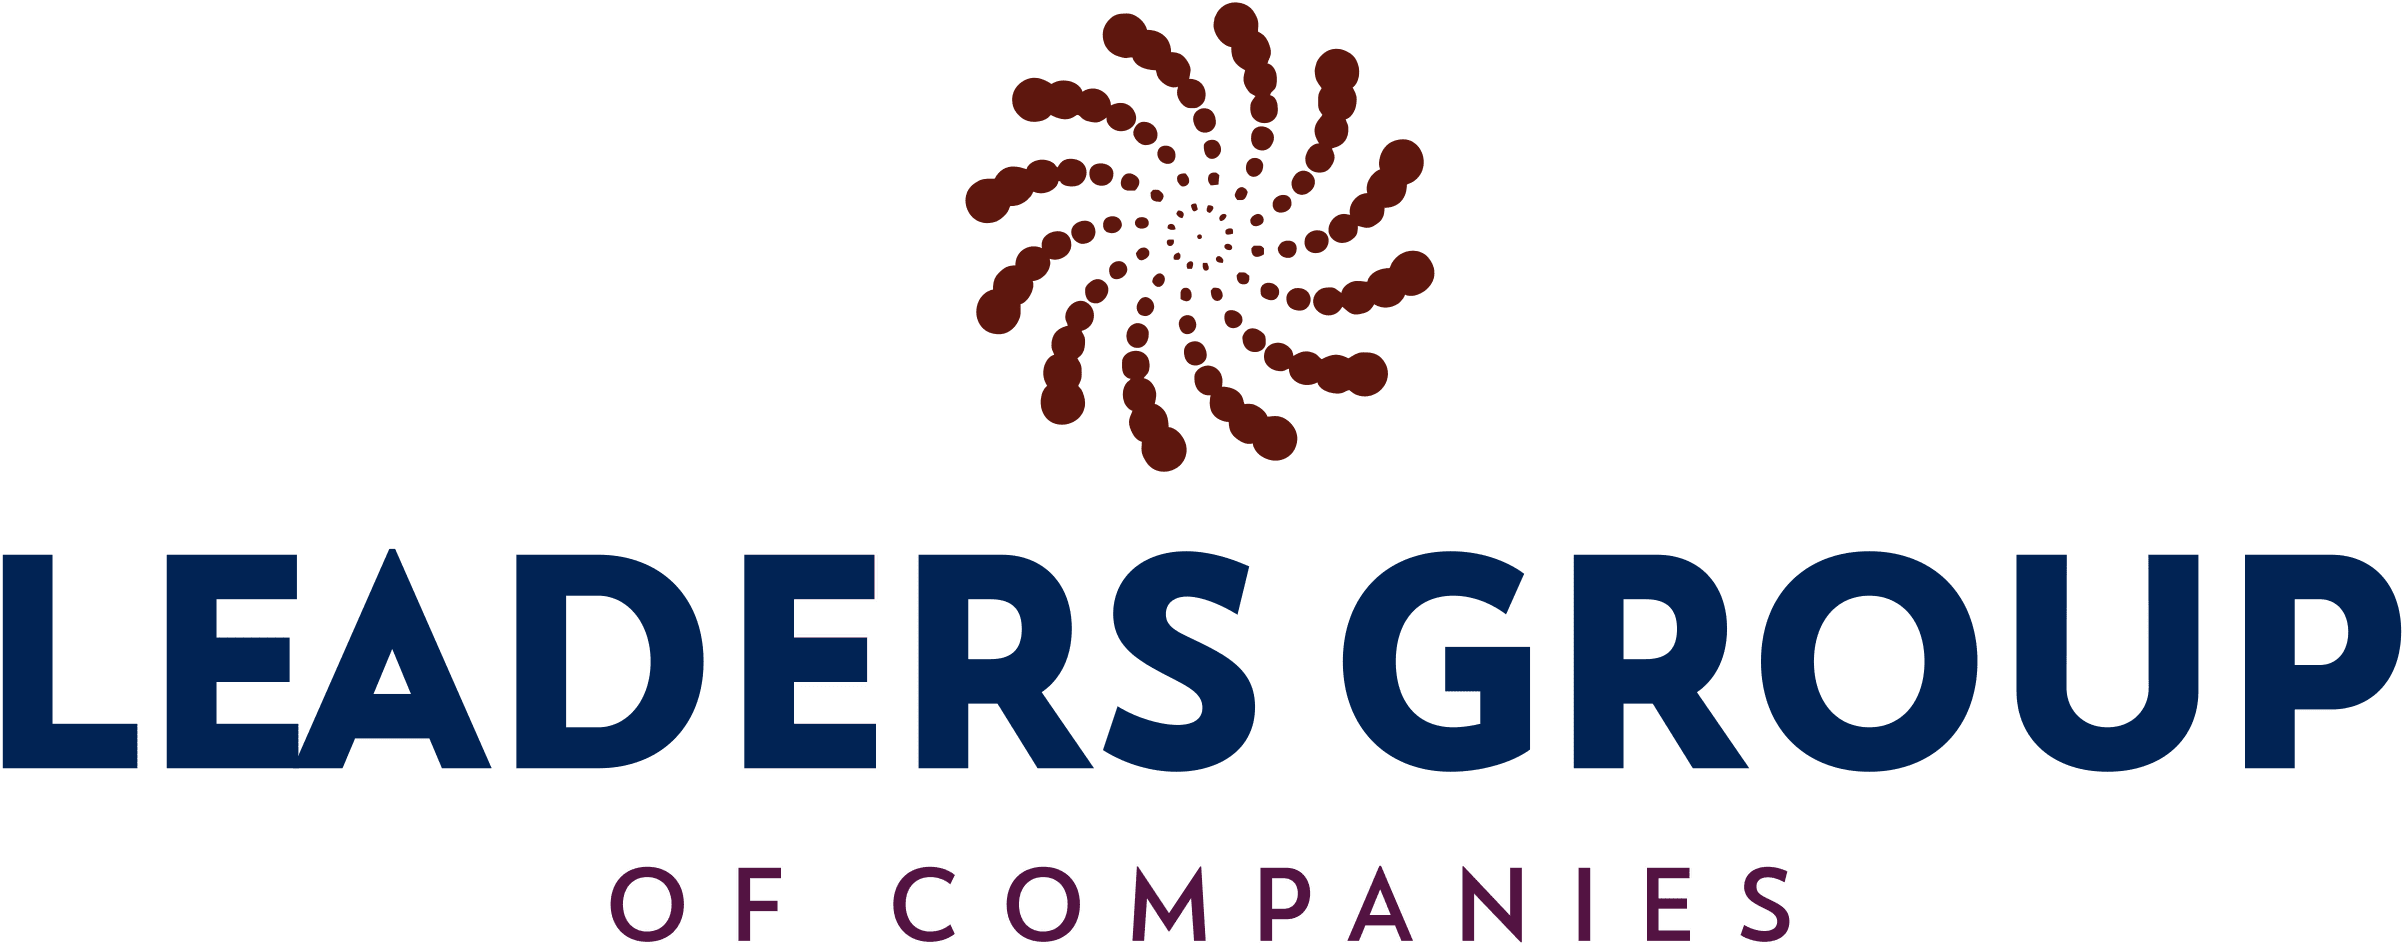 Leaders Group Of Companies | Business Consultant in Calgary